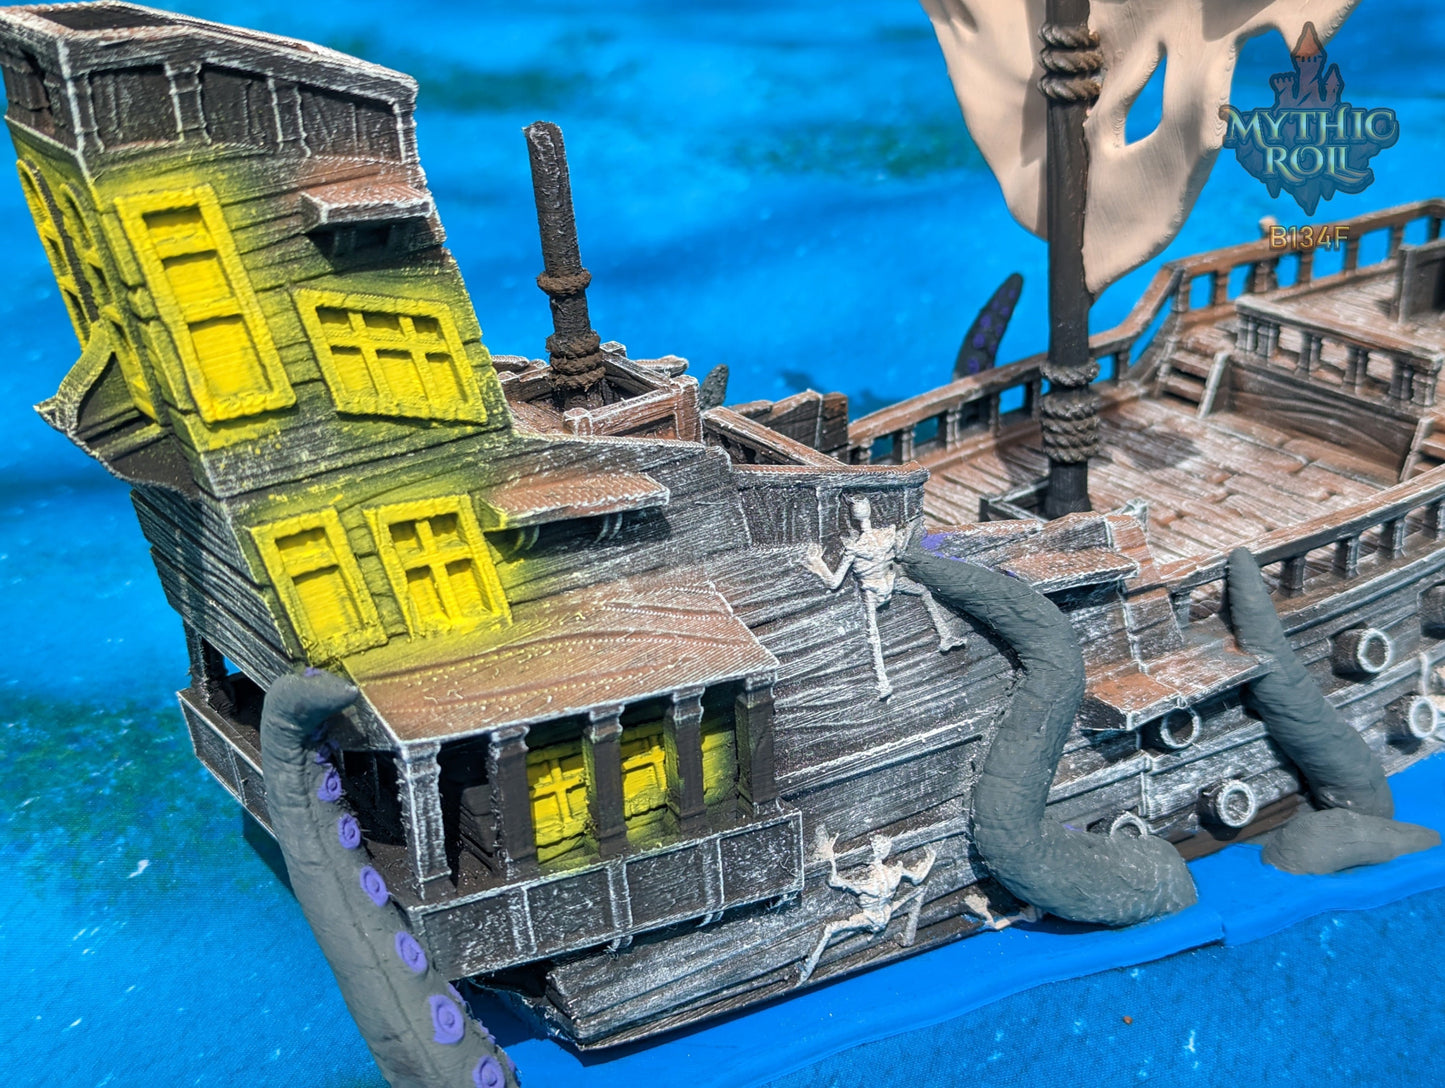 Ghost Pirate Ship 3D Printed Dice Tower - Mythic Roll Collection by Unchained Games | Dice Tray | D20 Dice Vault - Set sail into the unknown